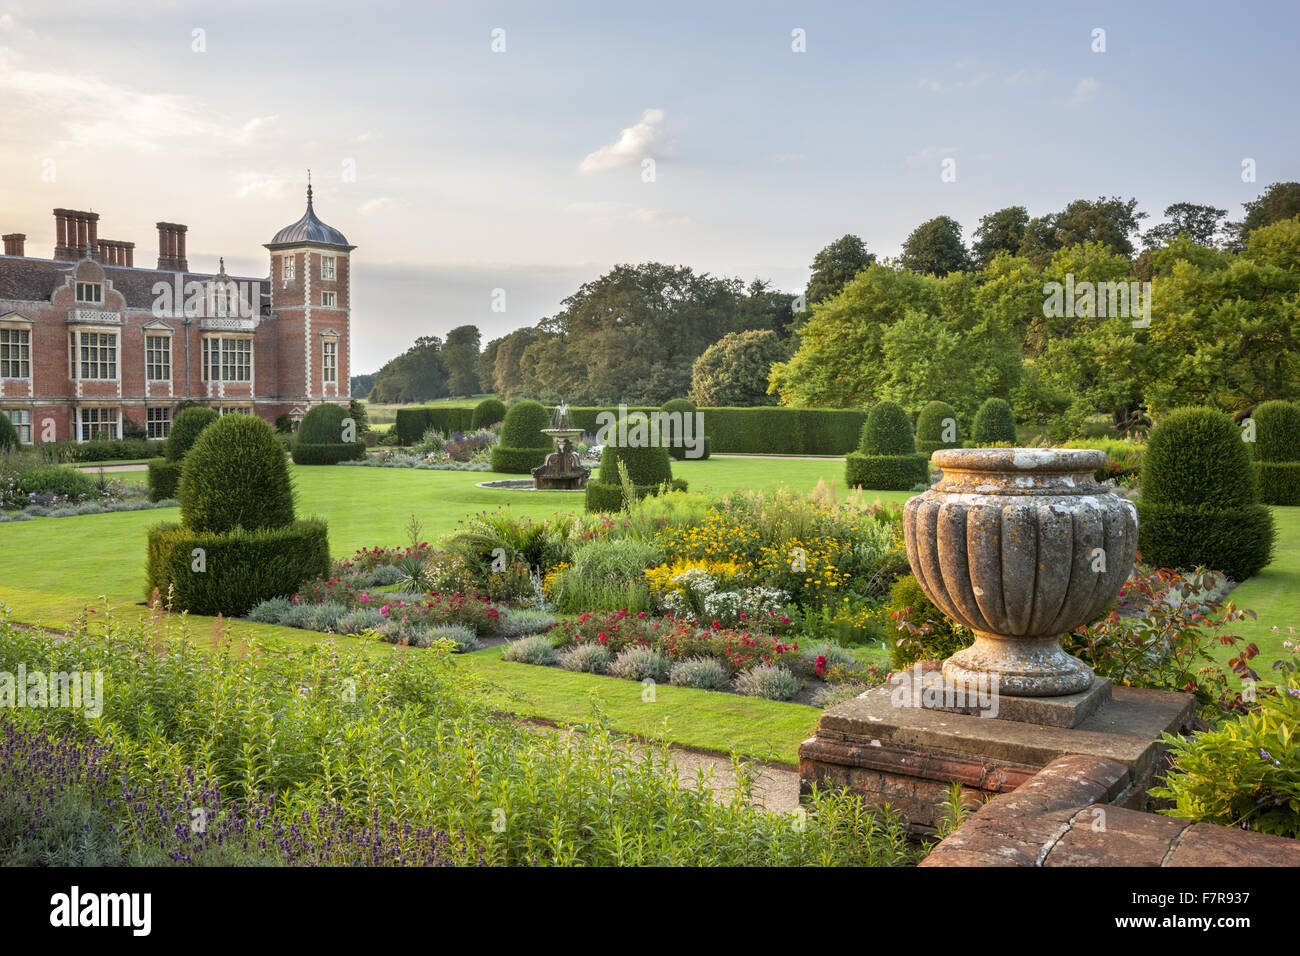 The Parterre Garden at Blickling Estate, Norfolk. Blickling is a turreted red-brick Jacobean mansion, sitting within beautiful gardens and parkland. Stock Photo